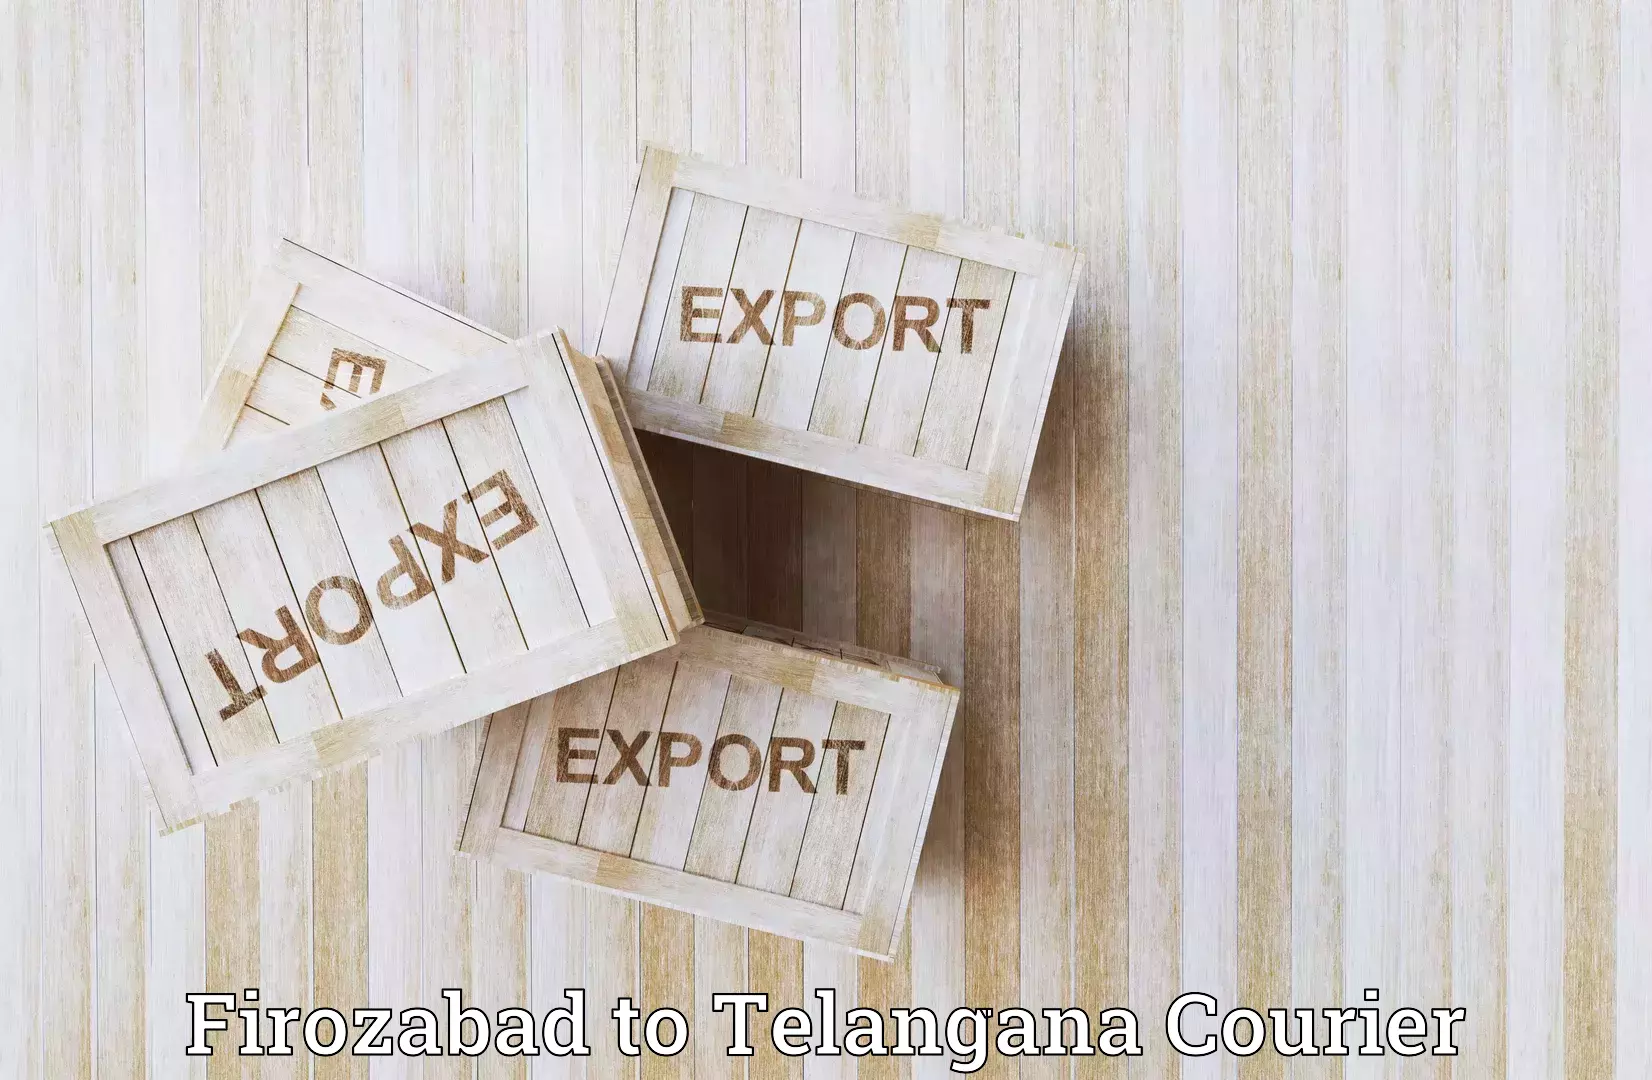 Quality courier services Firozabad to Hyderabad